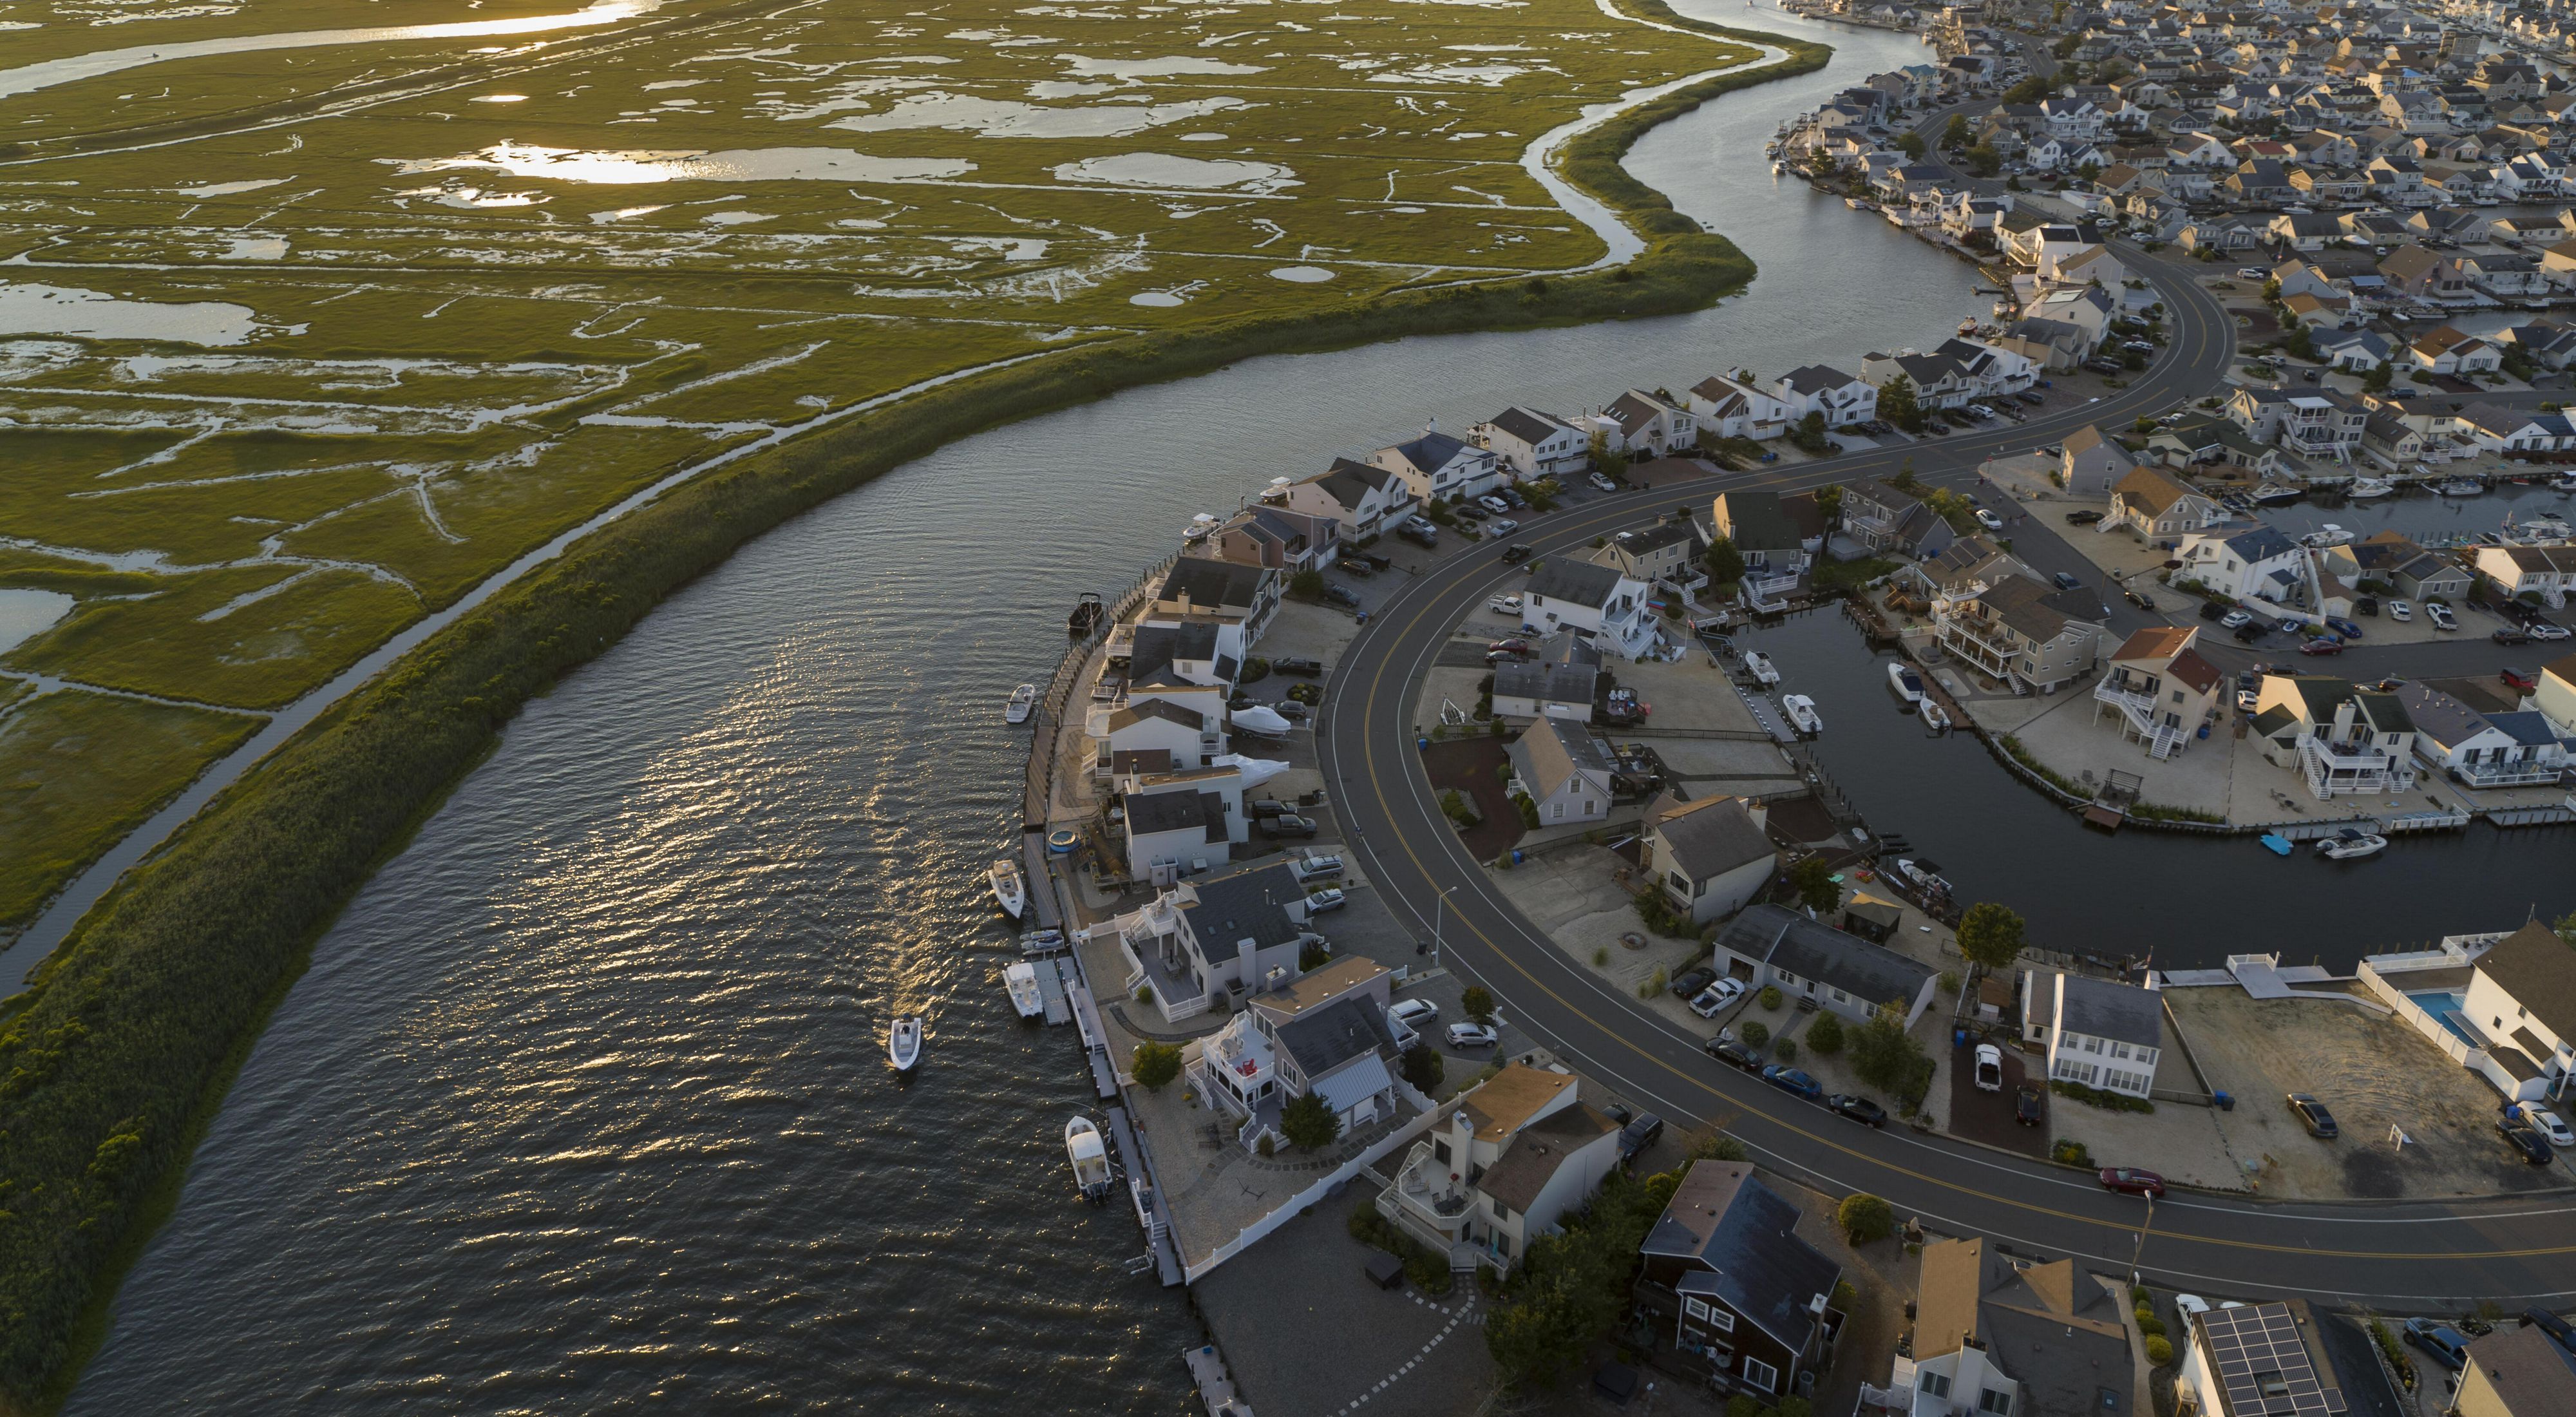 An aerial view of a coastal town surrounded by marsh and water.